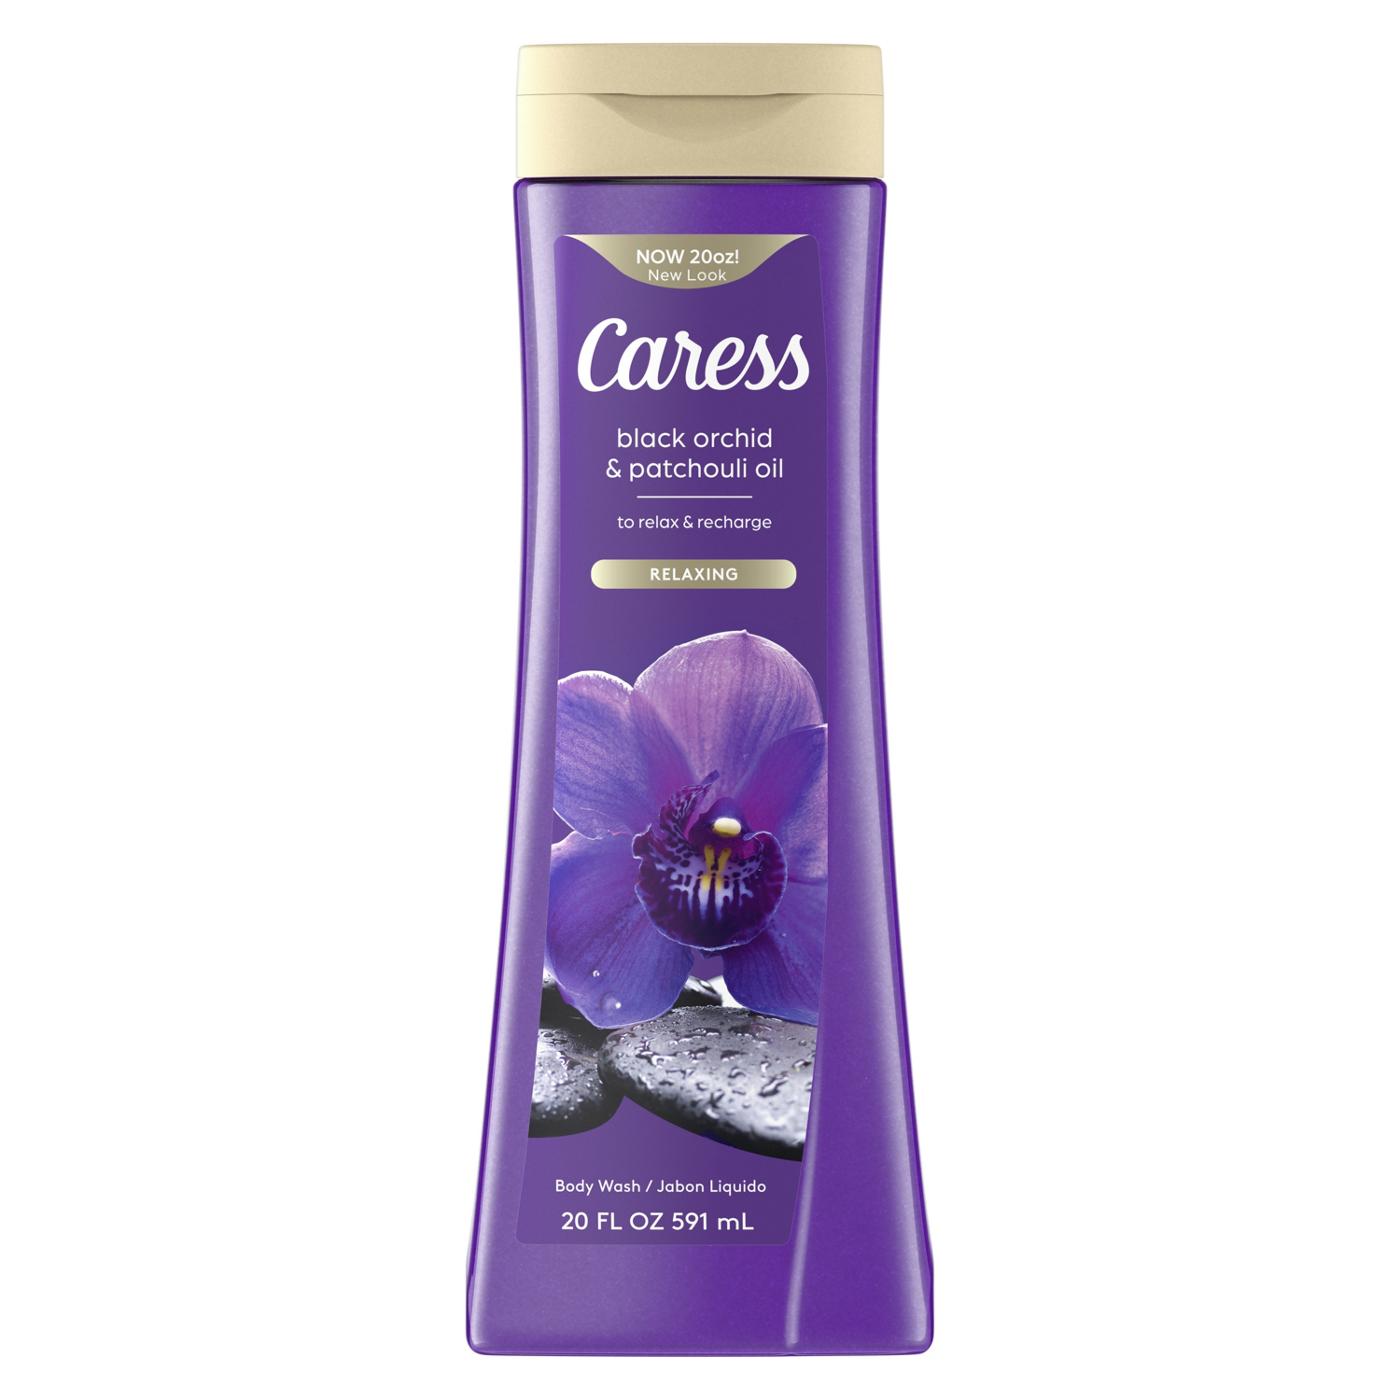 Caress Relaxing Body Wash - Black Orchid & Patchouli Oil; image 1 of 7